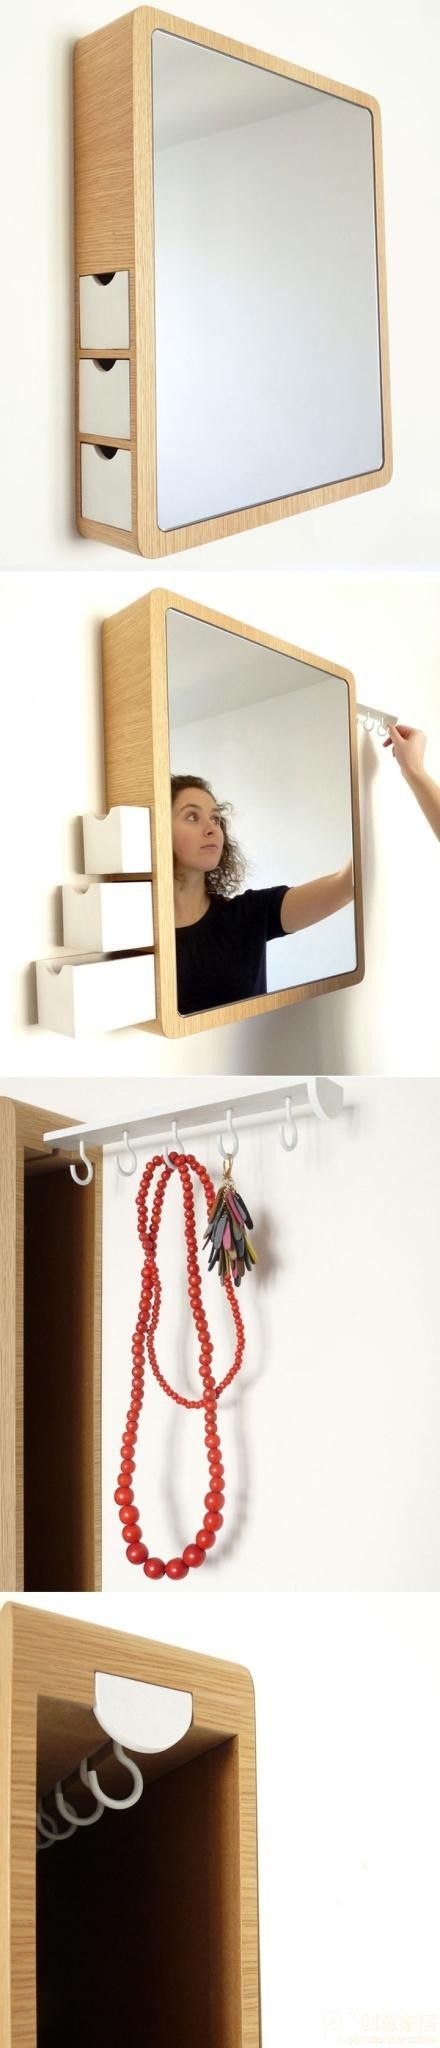 This clever makeup mirror comes with hidden hanger and sliding storage boxes | D...